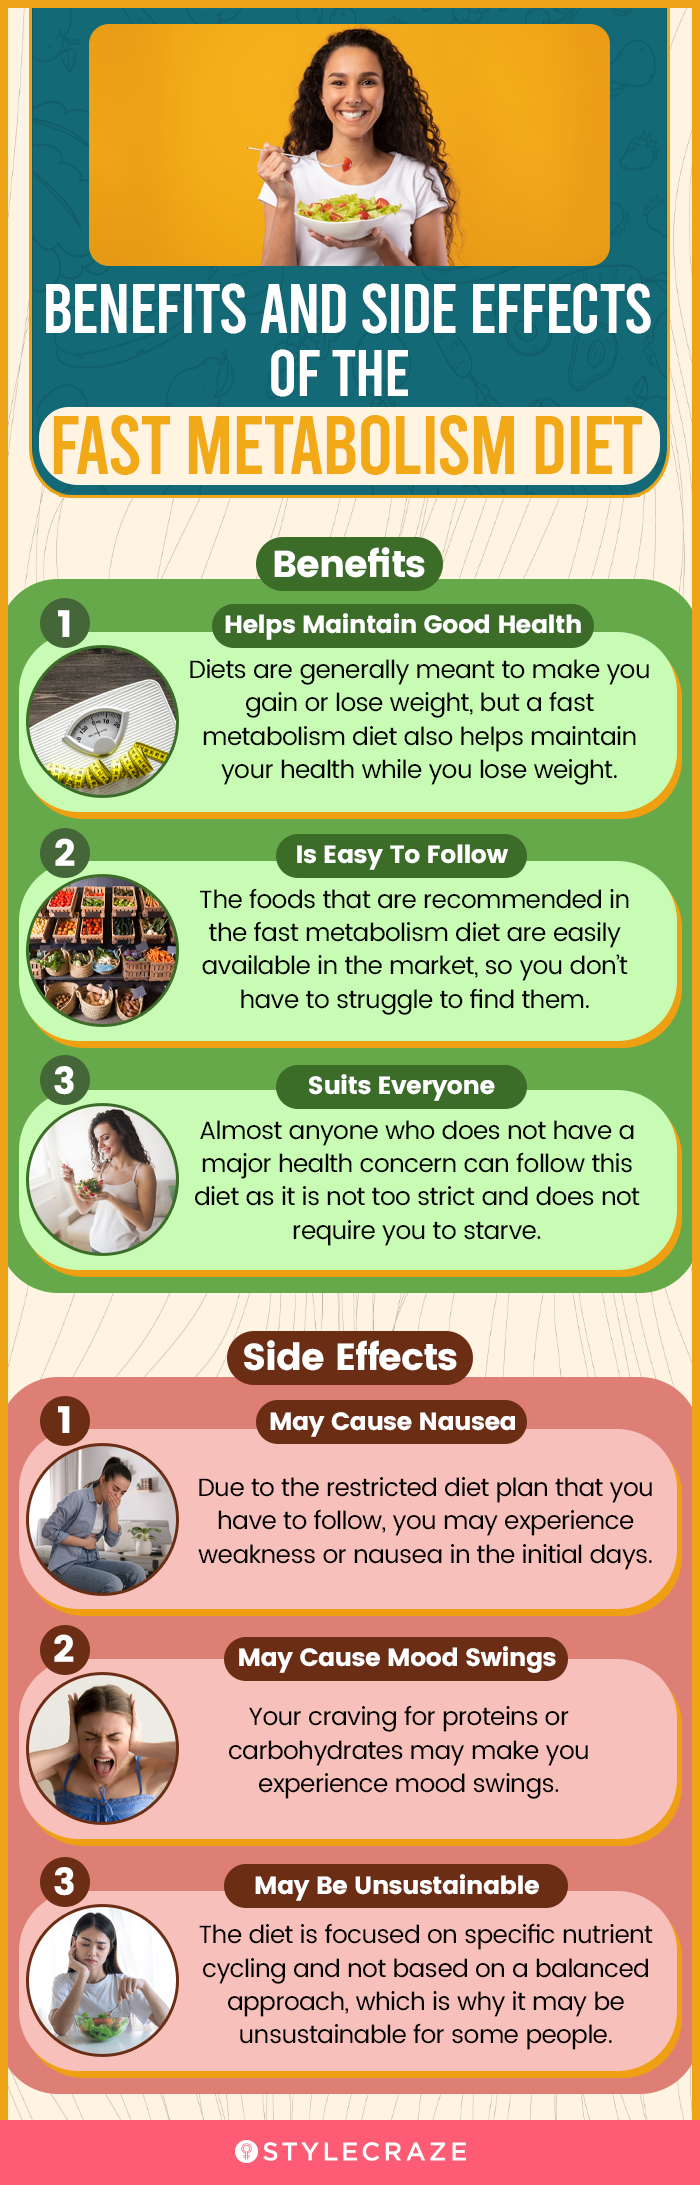 benefits and side effects of the fast metabolism diet (infographic)